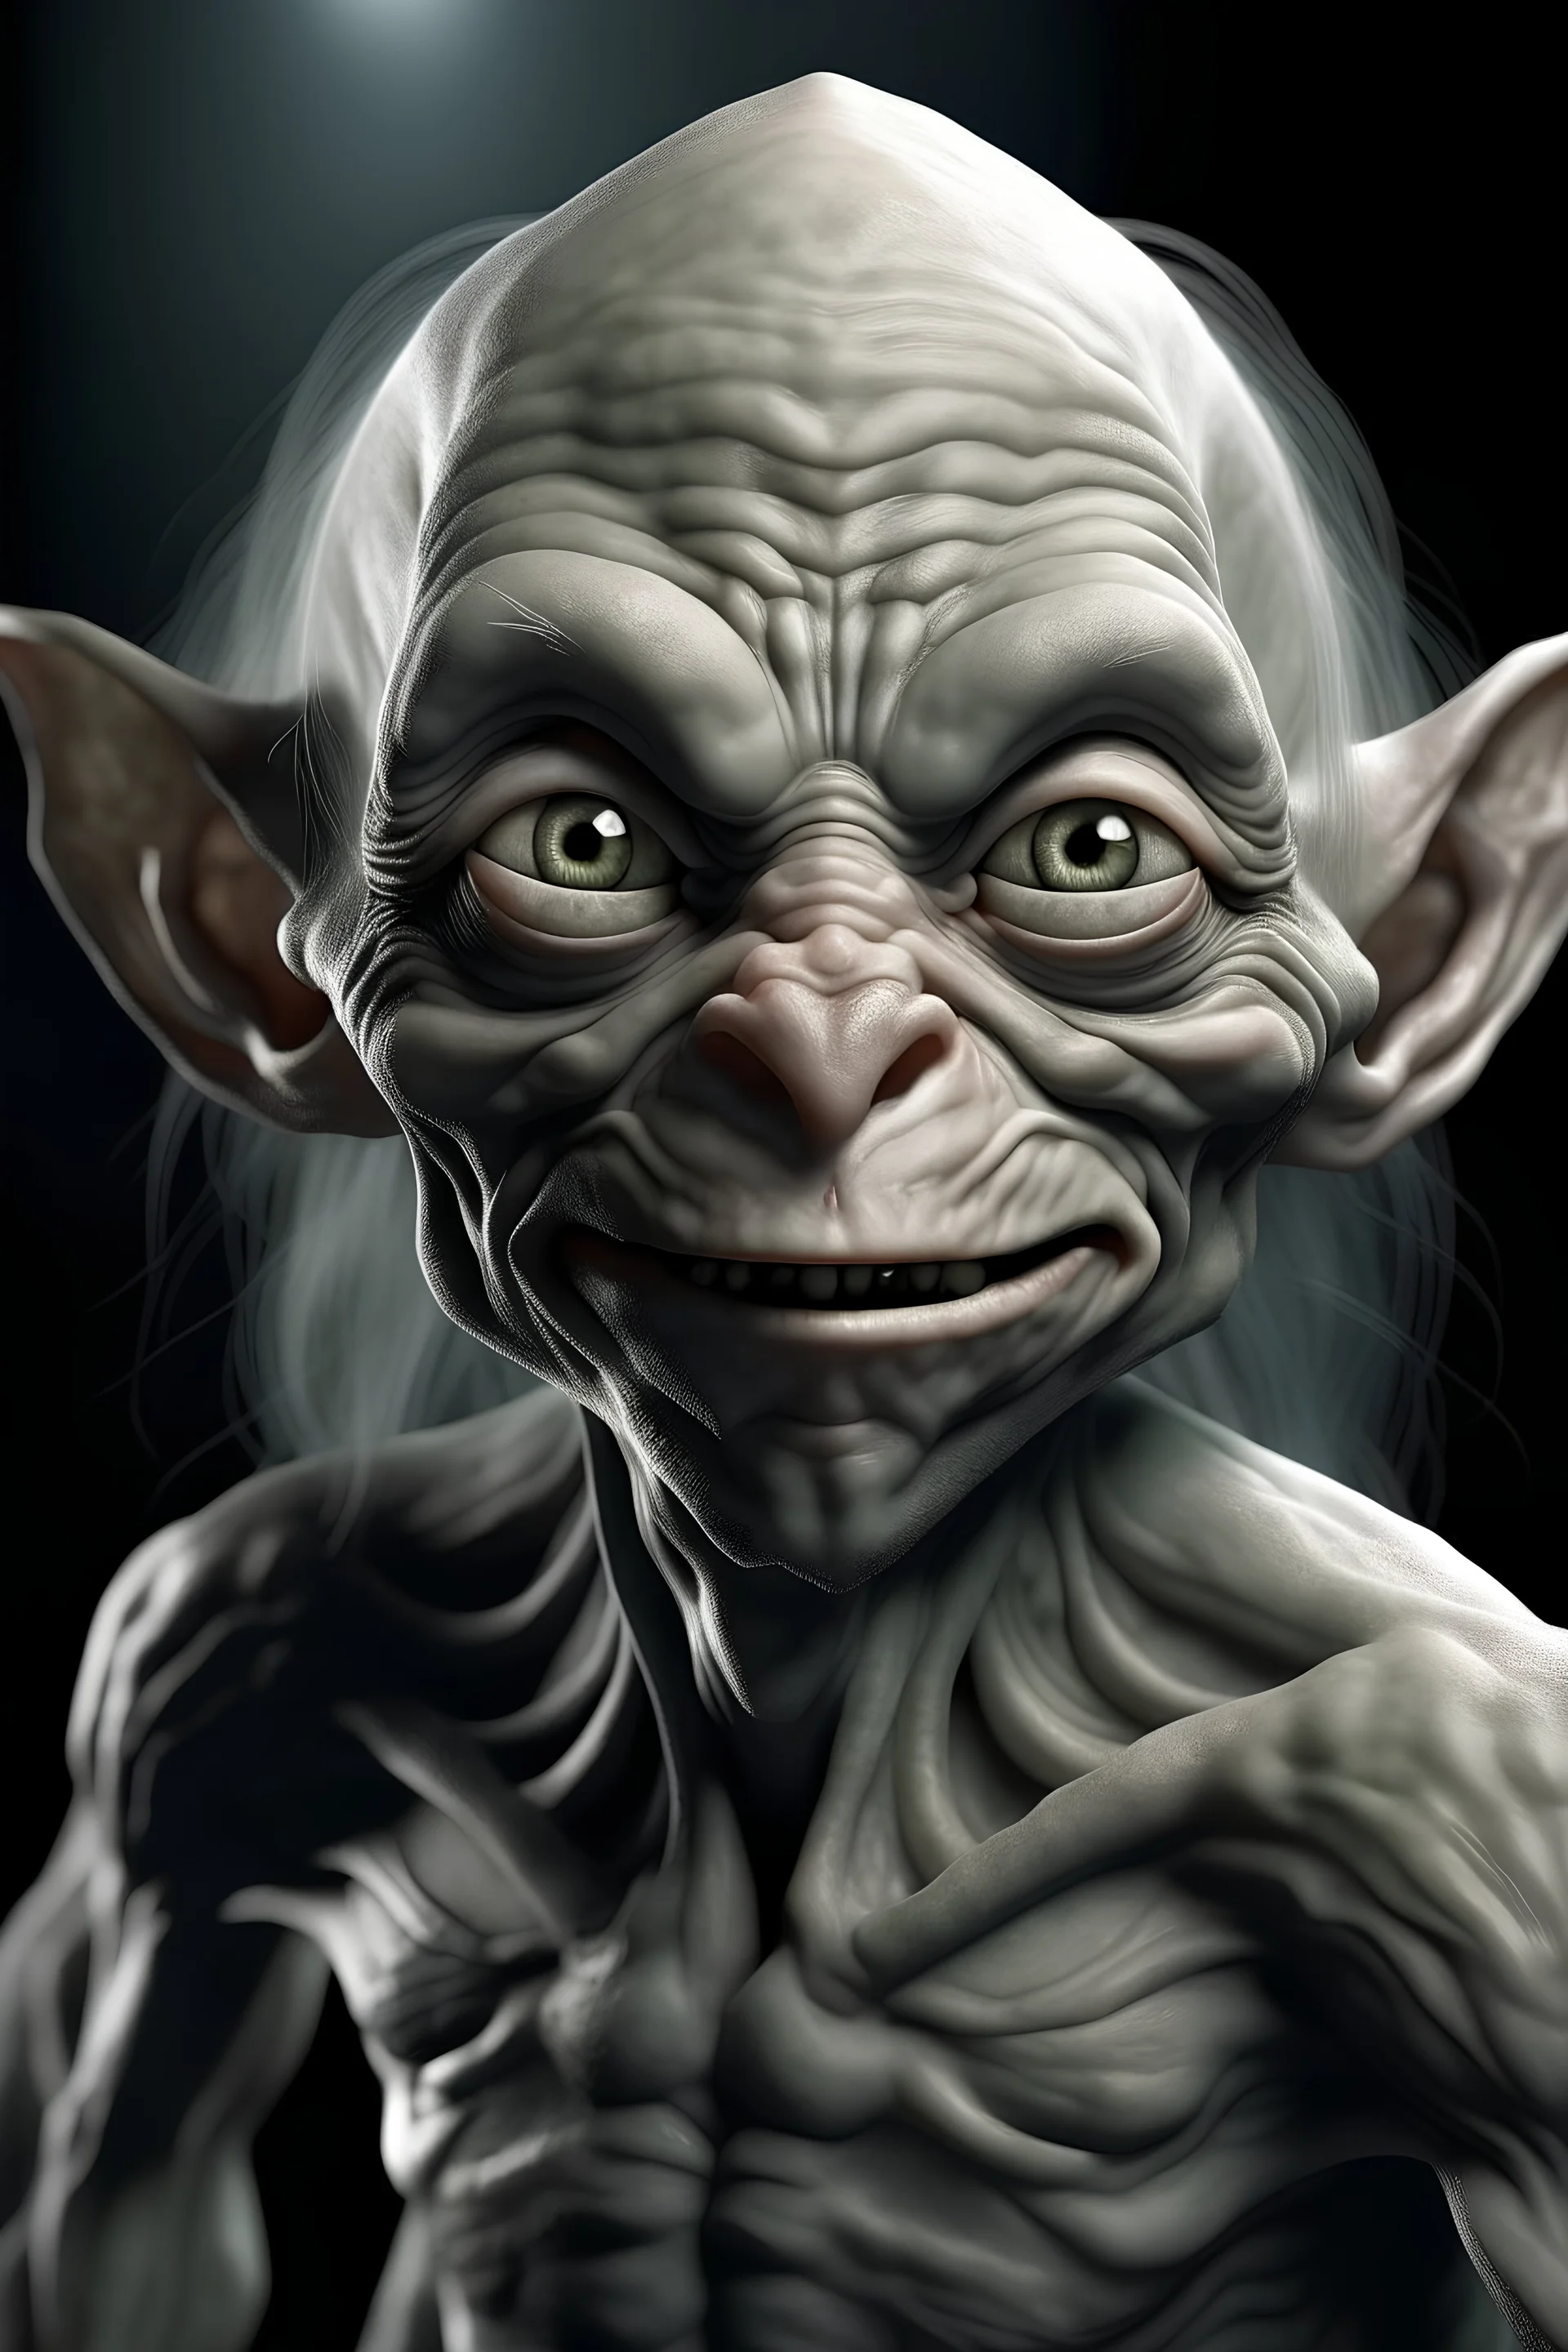 gollum but really good-looking